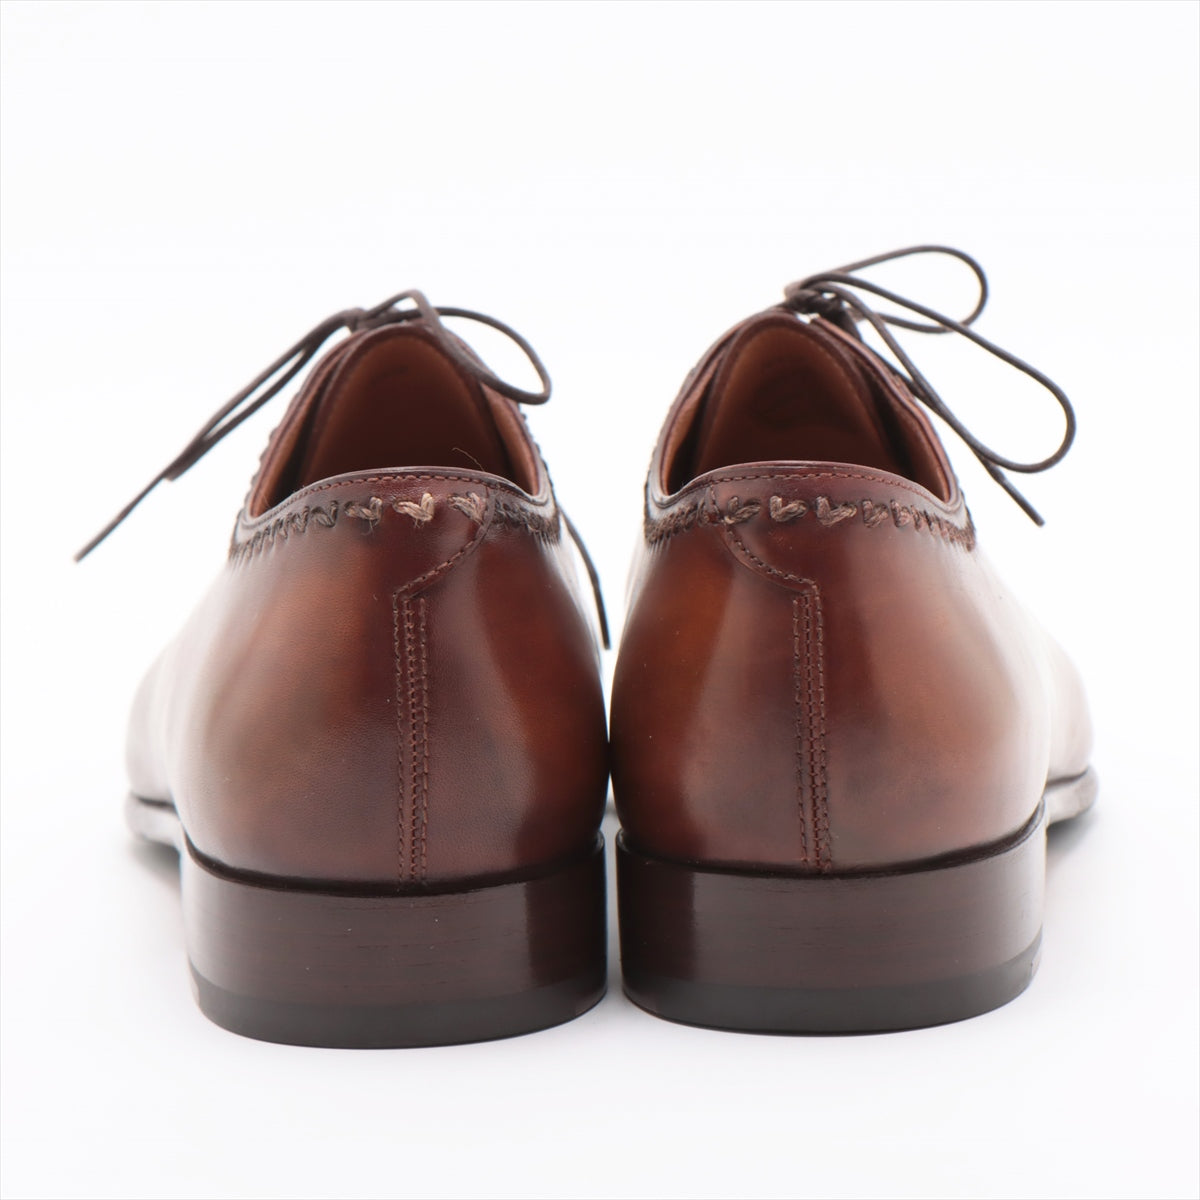 Berluti Leather Dress shoes 8 Men's Brown Comes with genuine shoe keeper stitching